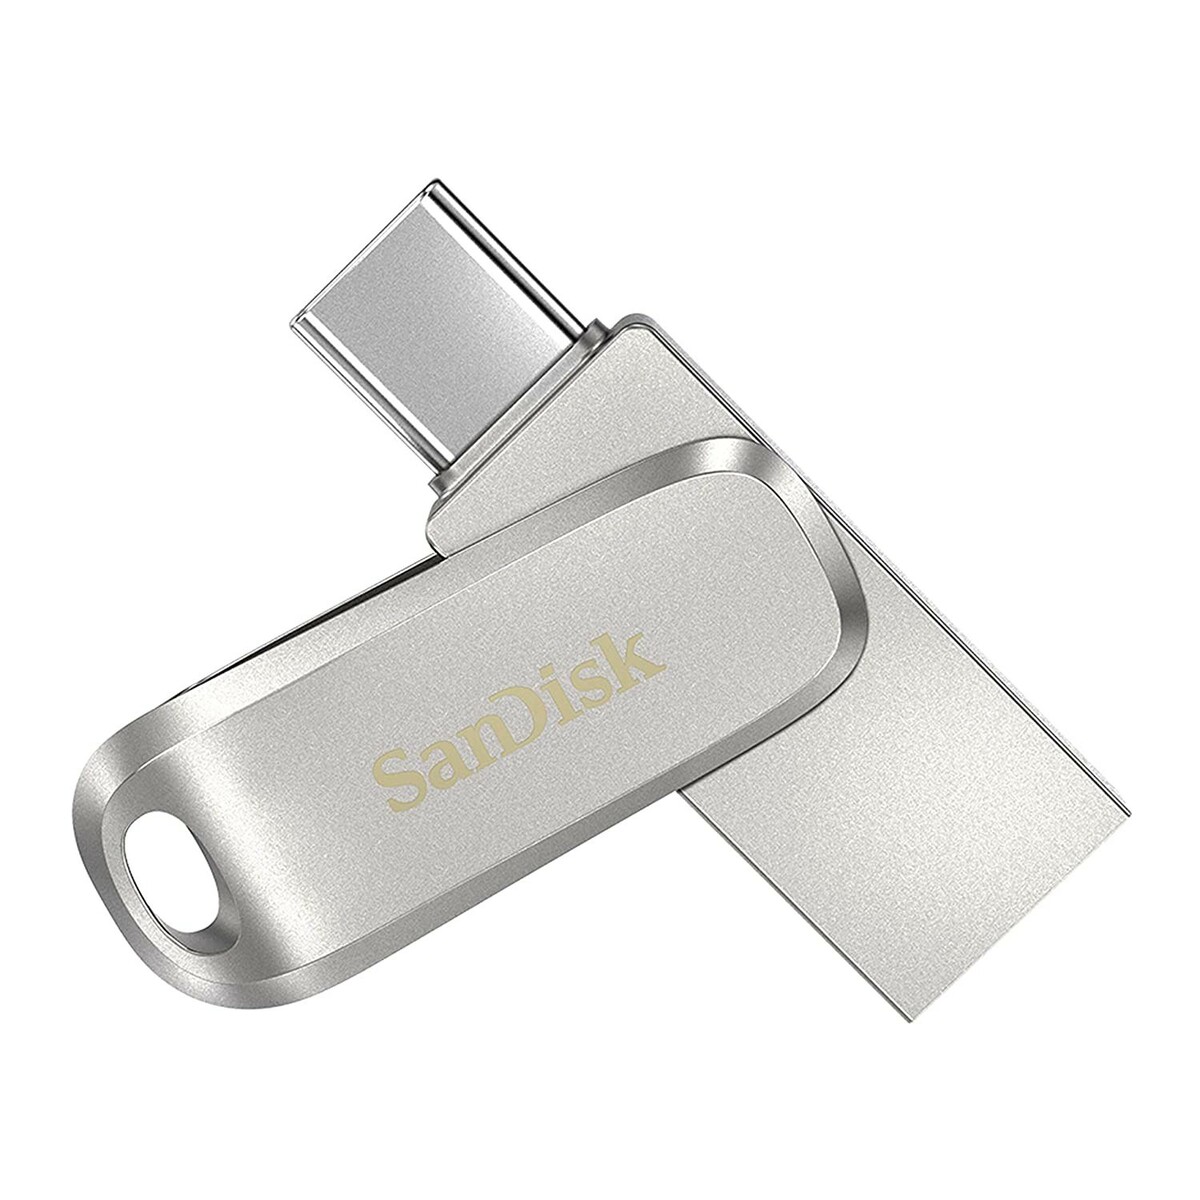 Sandisk USB-C Dual Drive Luxe 128GB